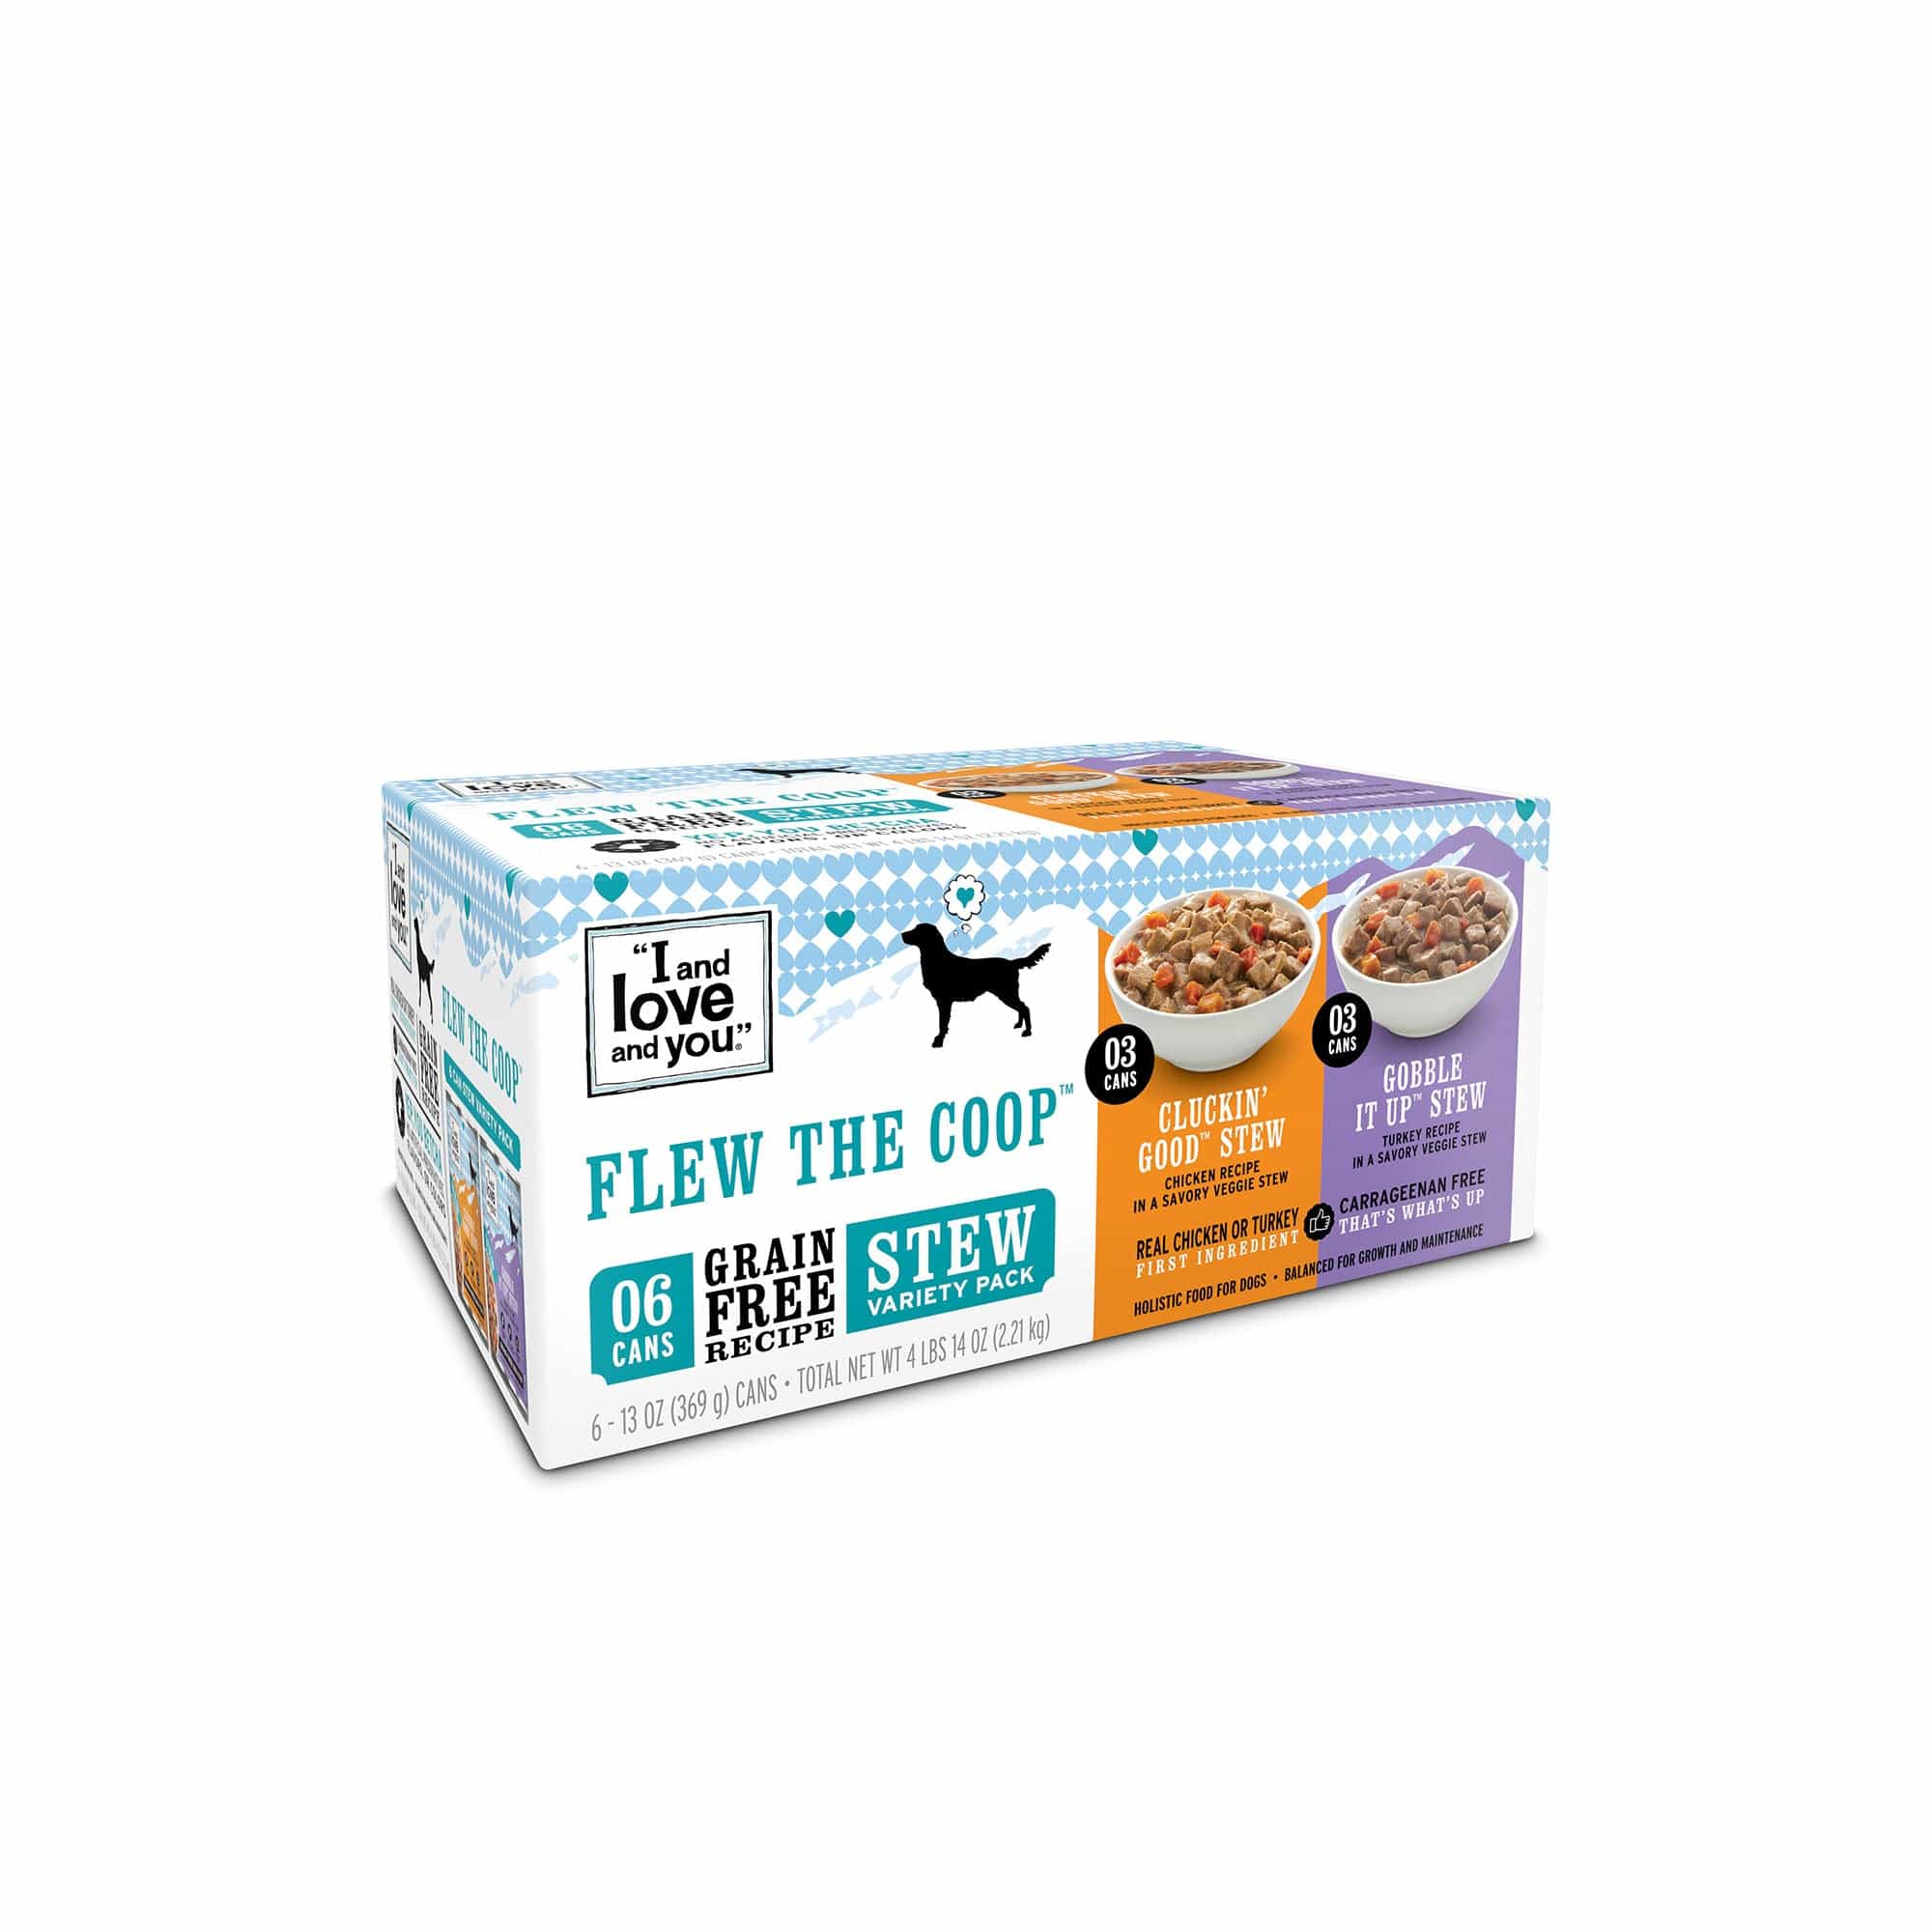 Dog Can Variety-Pack - Flew The Coop: A box of dog food with a variety of poultry-packed canned wet meals, including Cluckin’ Good and Gobble It Up.